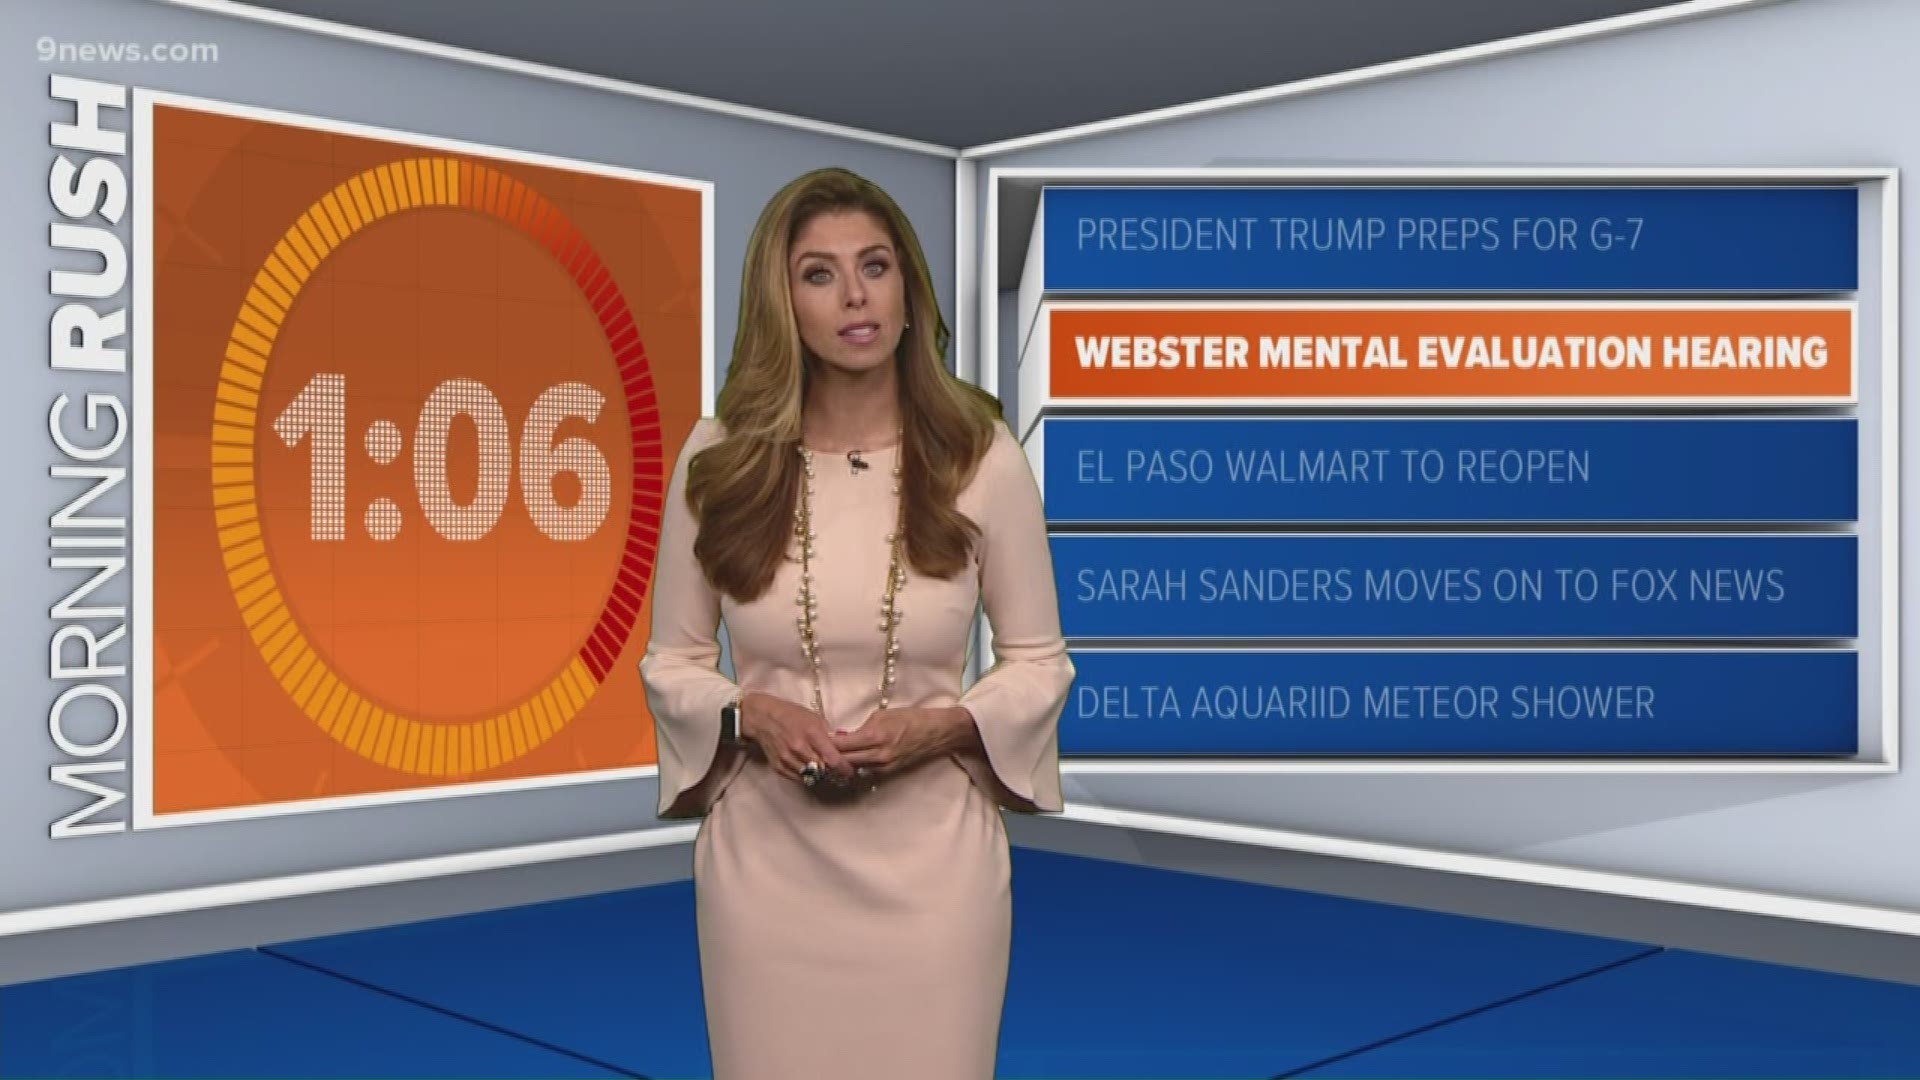 The top headlines for Friday, August 23, 2019.